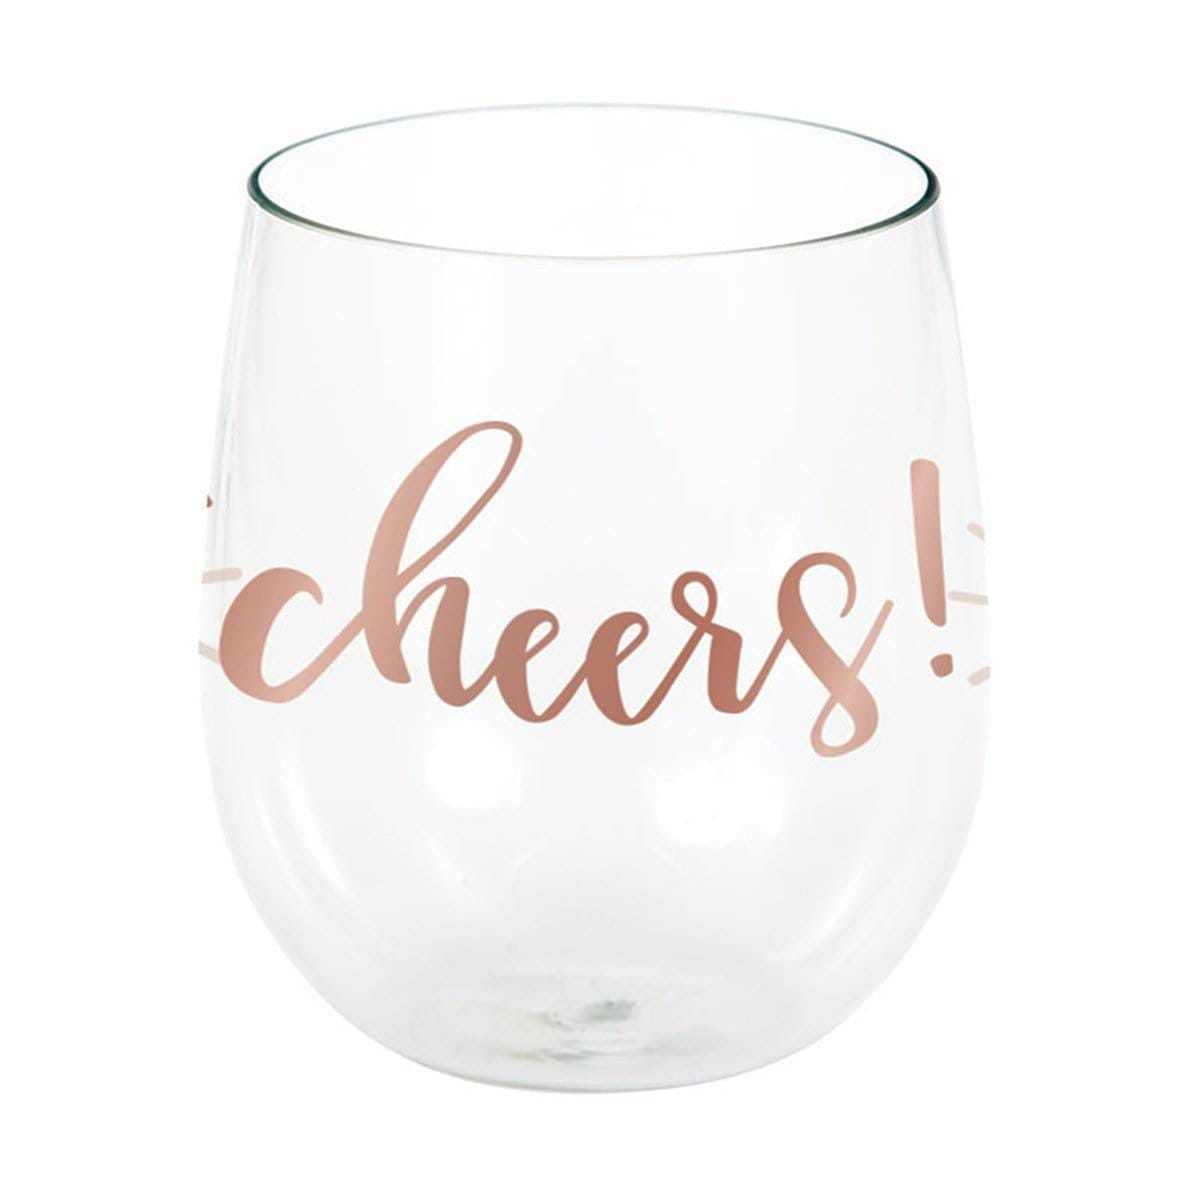 Buy Everyday Entertaining Rosé All Day Cheers Wine Glass, 14 Ounces sold at Party Expert